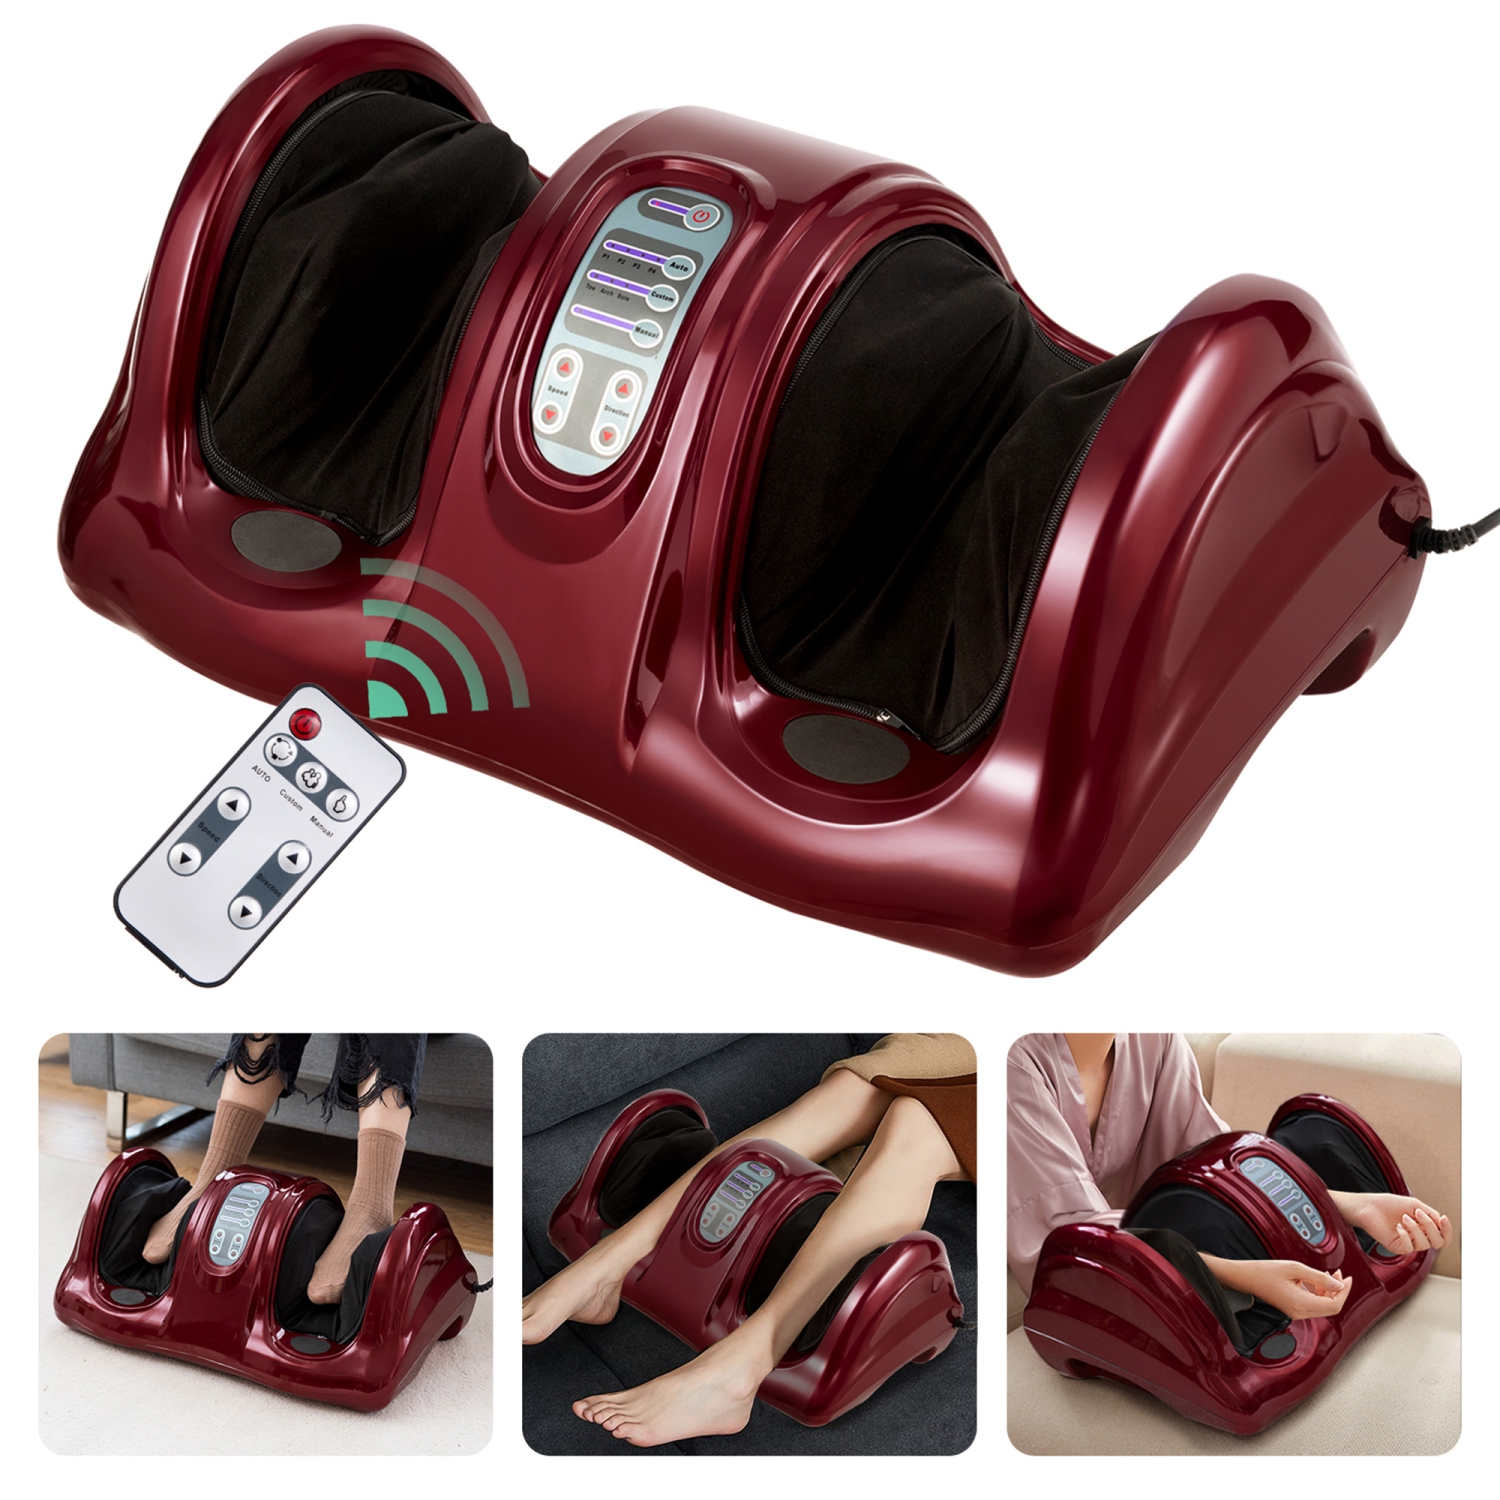 Costway Shiatsu Foot Massager Kneading and Rolling Leg Calf Ankle w/Remote Red Burgu New